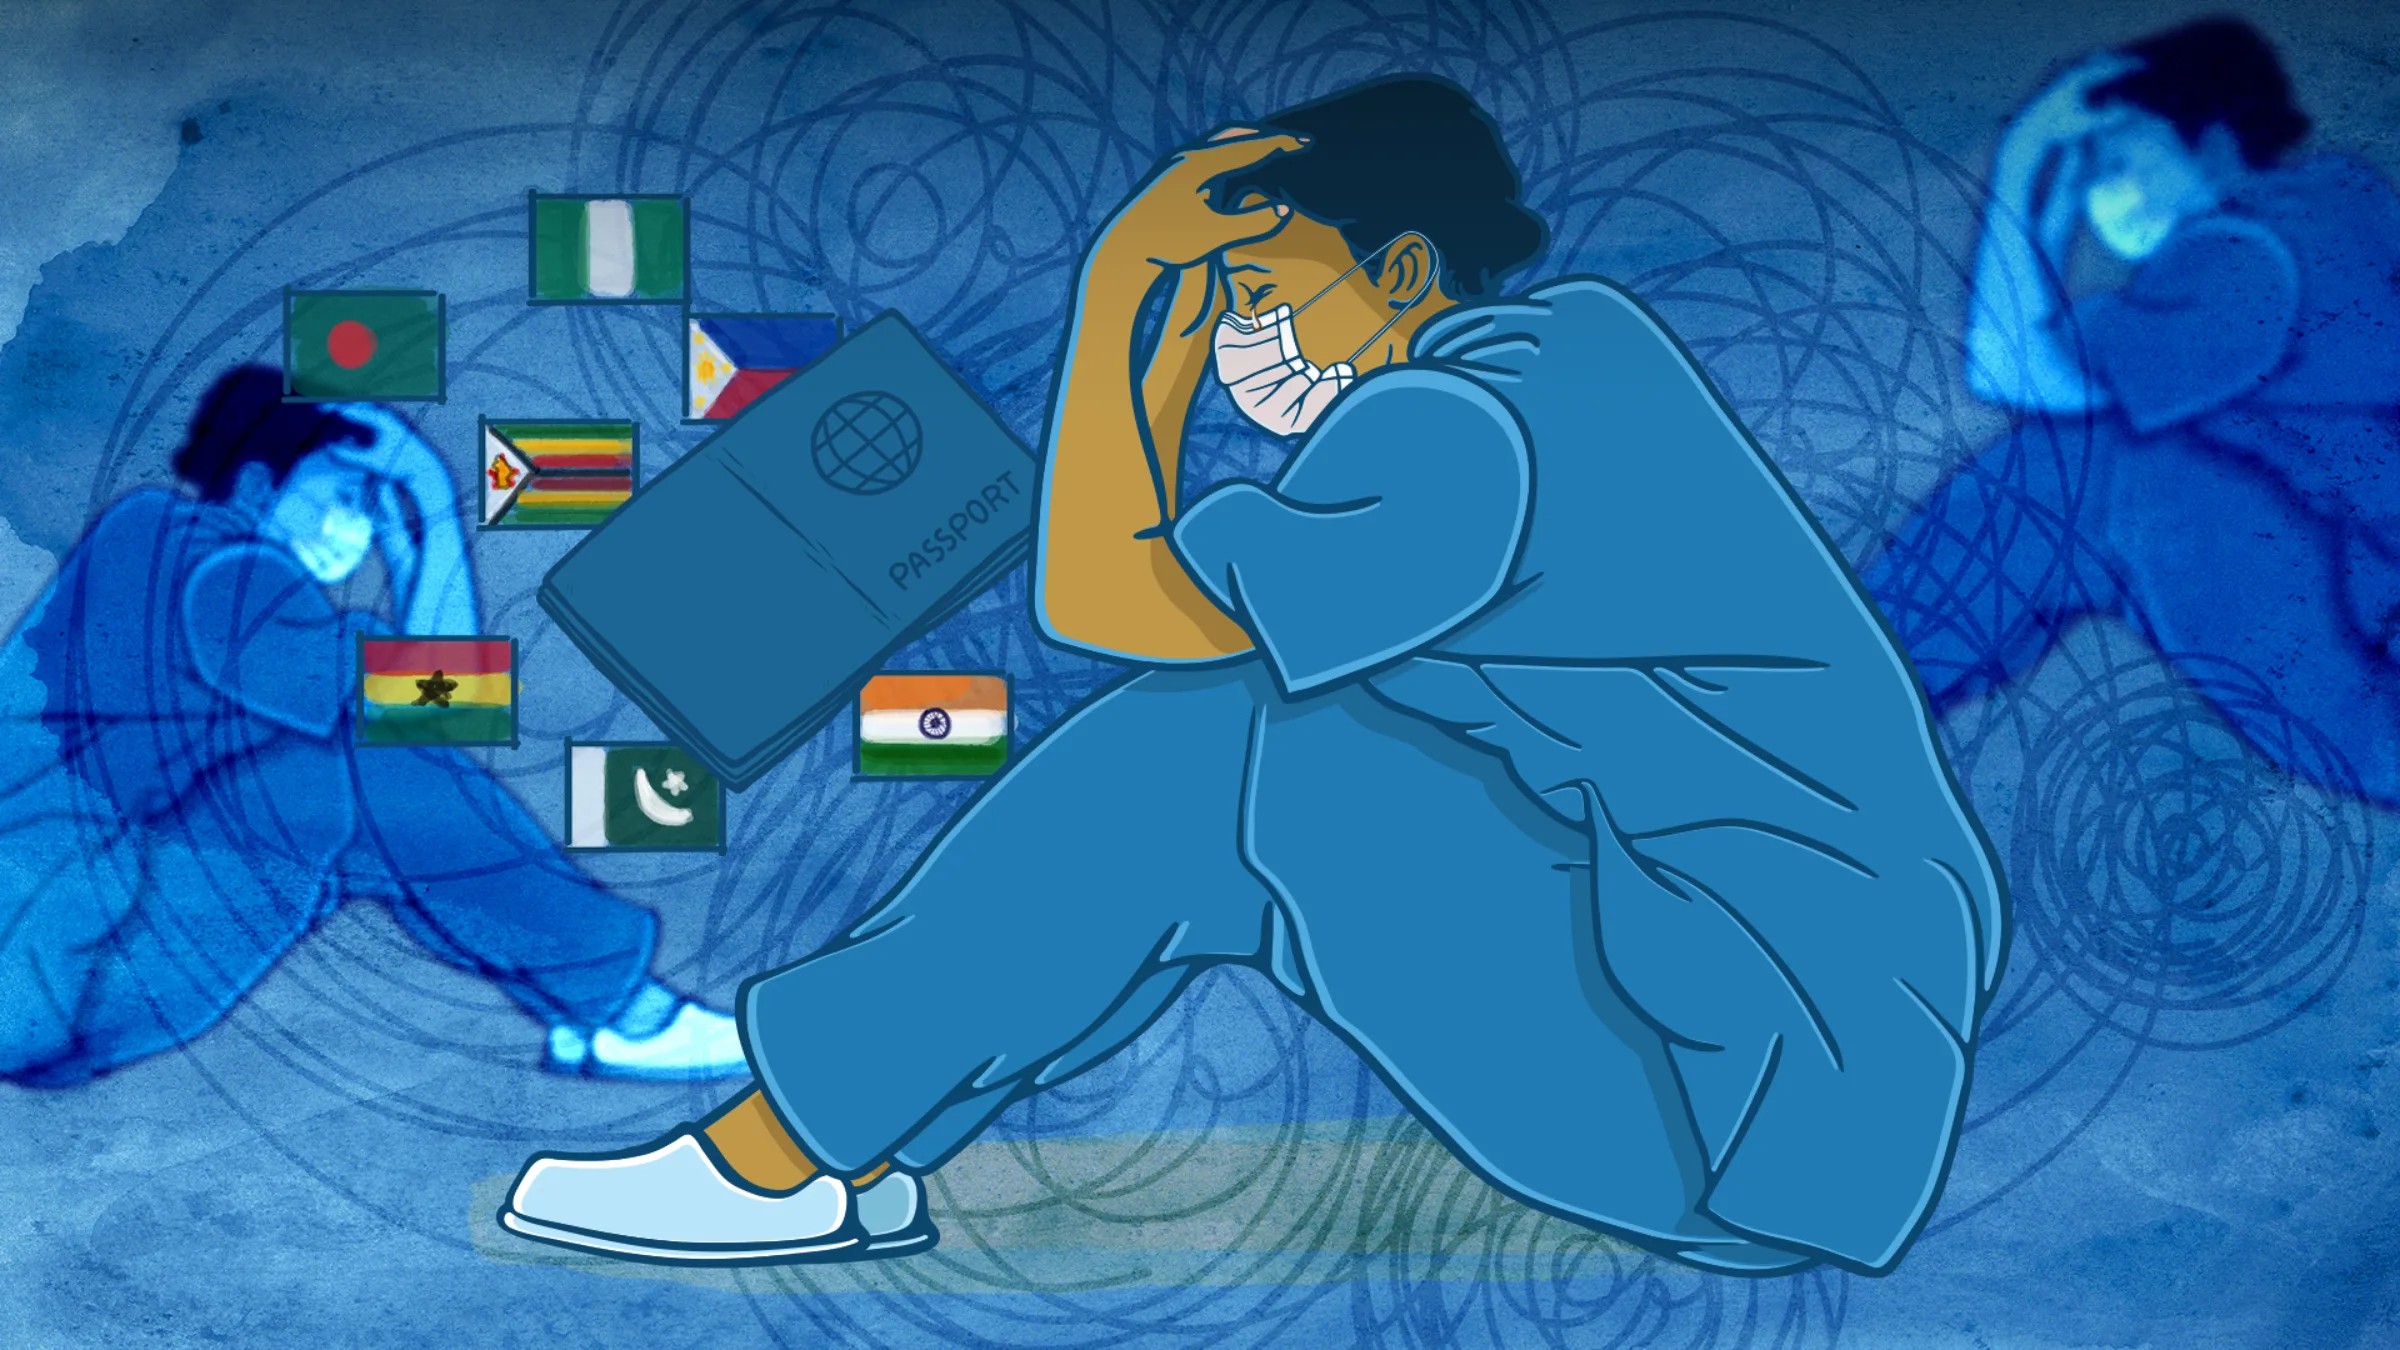 An illustration of a female carer wearing a face mark holding her head in despair, with images of a passport in the background.